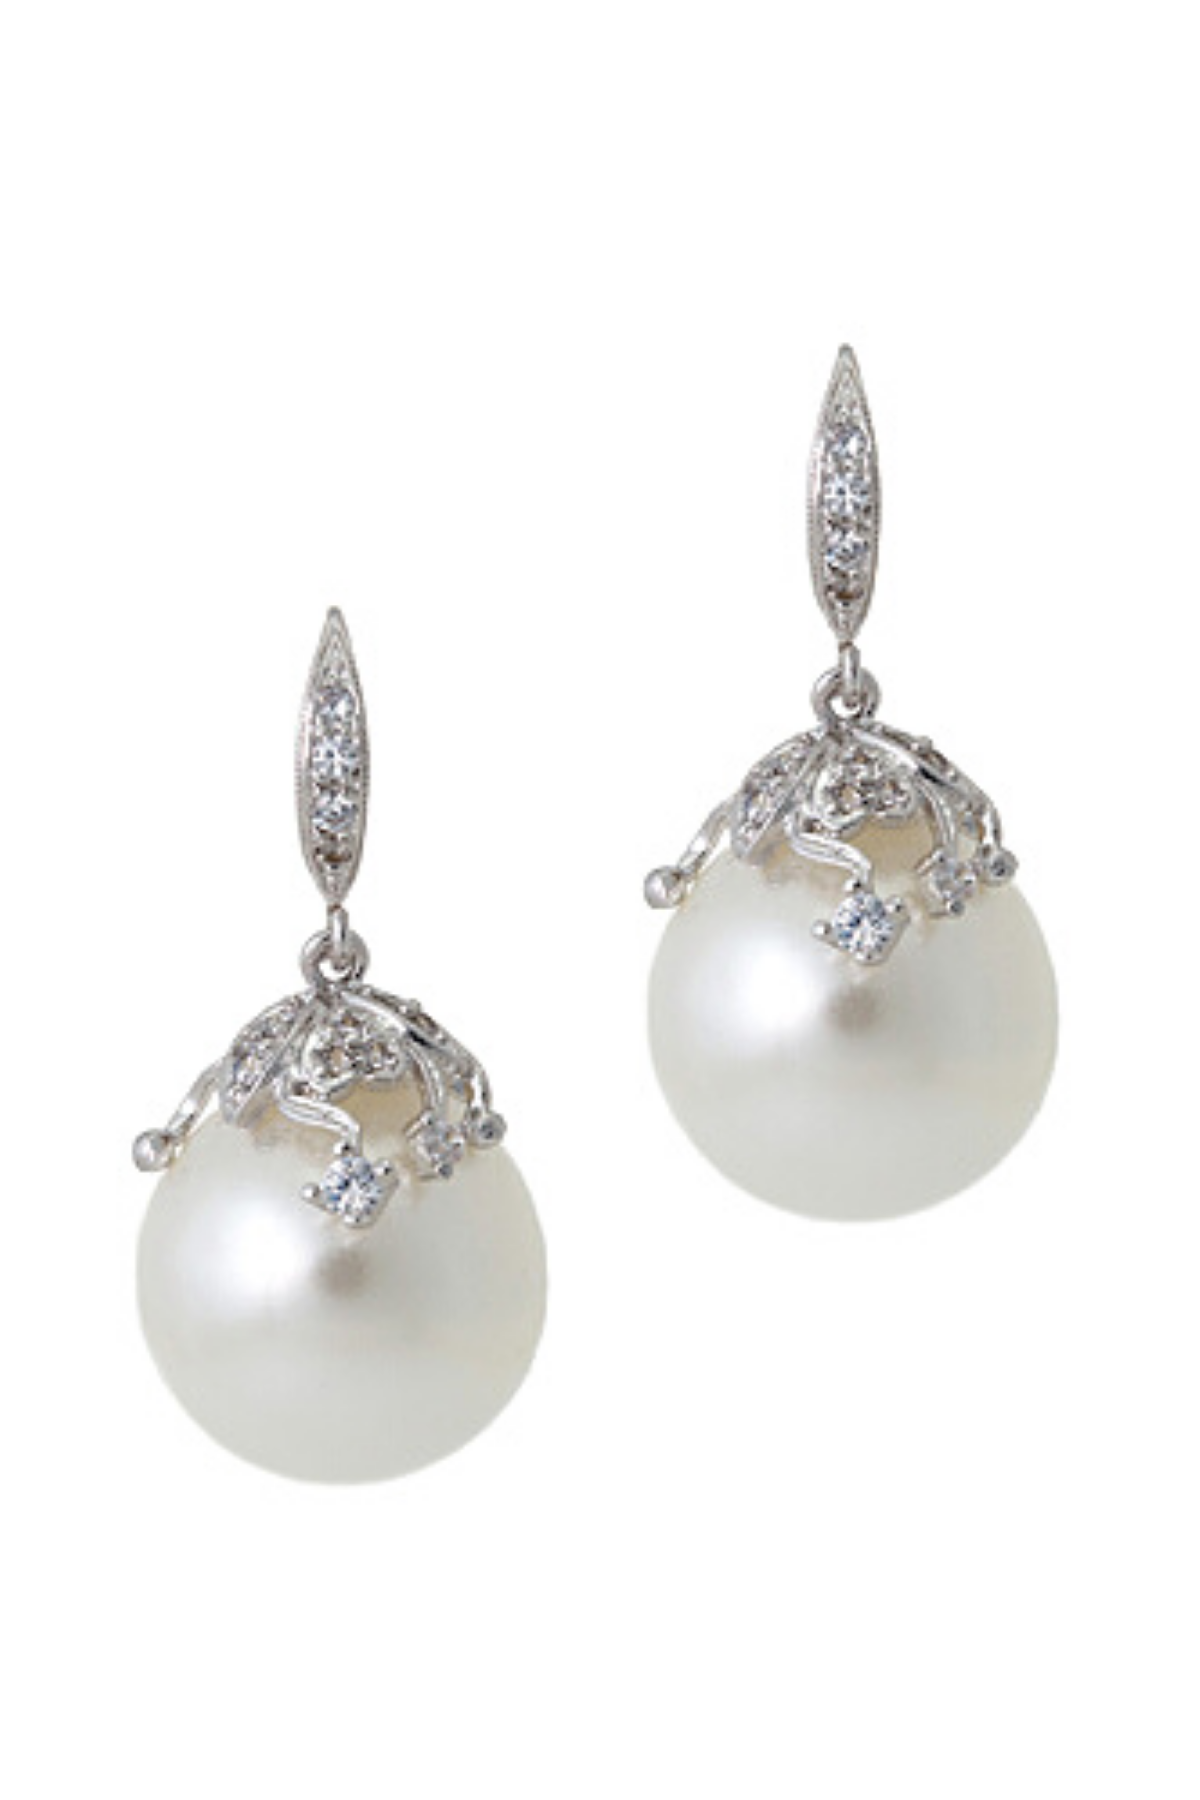 Shell pearl drop earrings - Park Lane Styling & Consulting